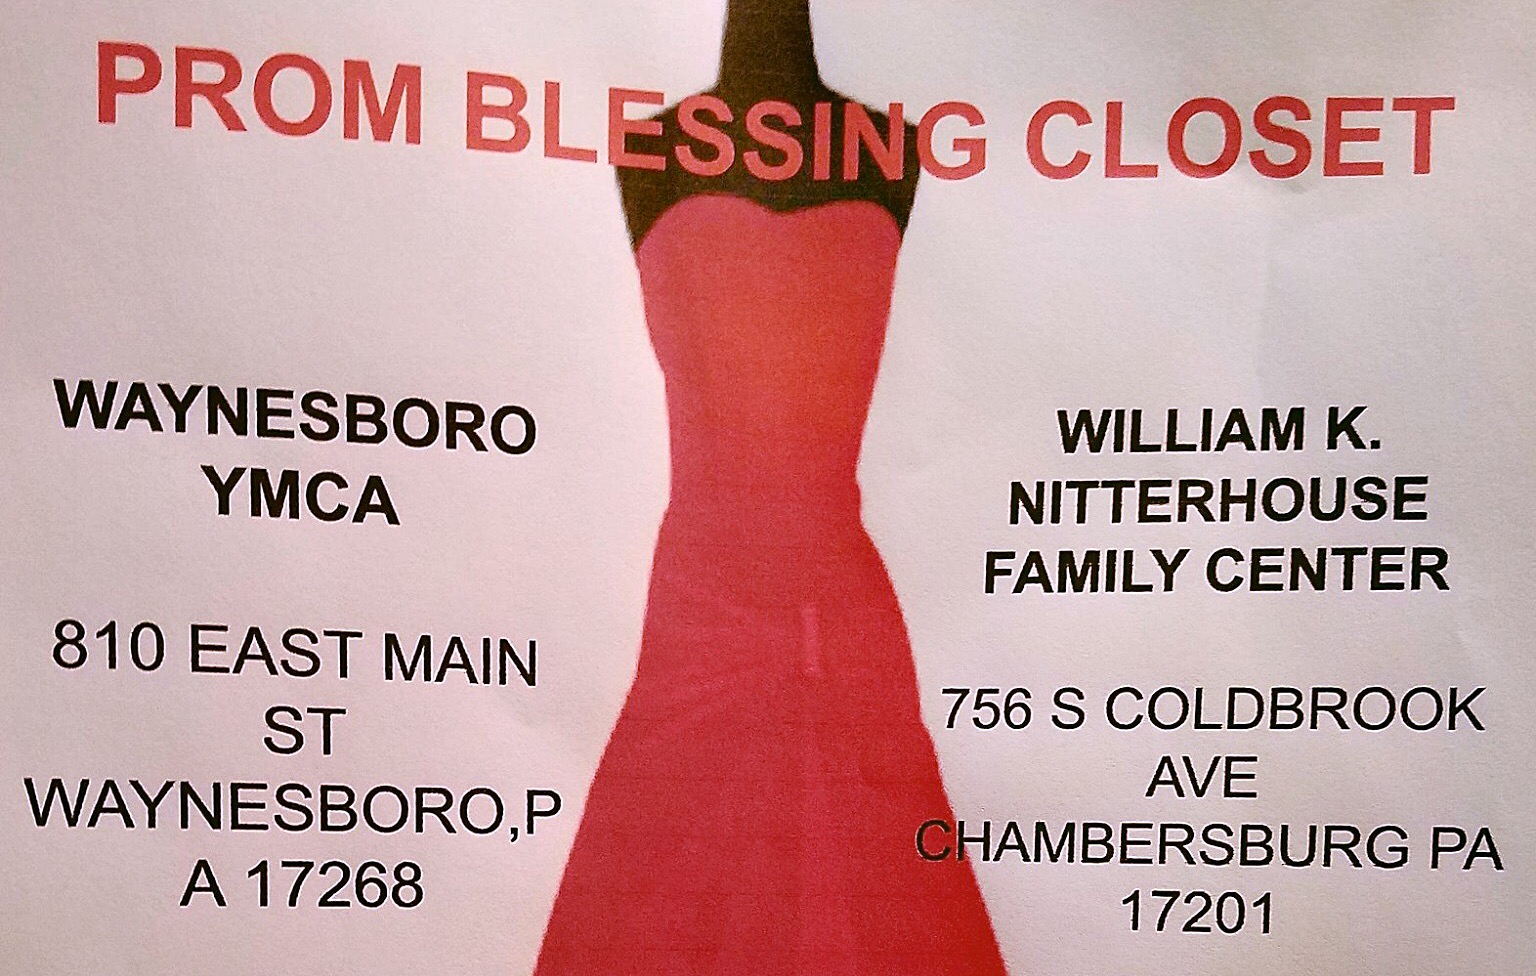 Prom Blessing Closet March 24 & 25, 2018 SHIP SAVES